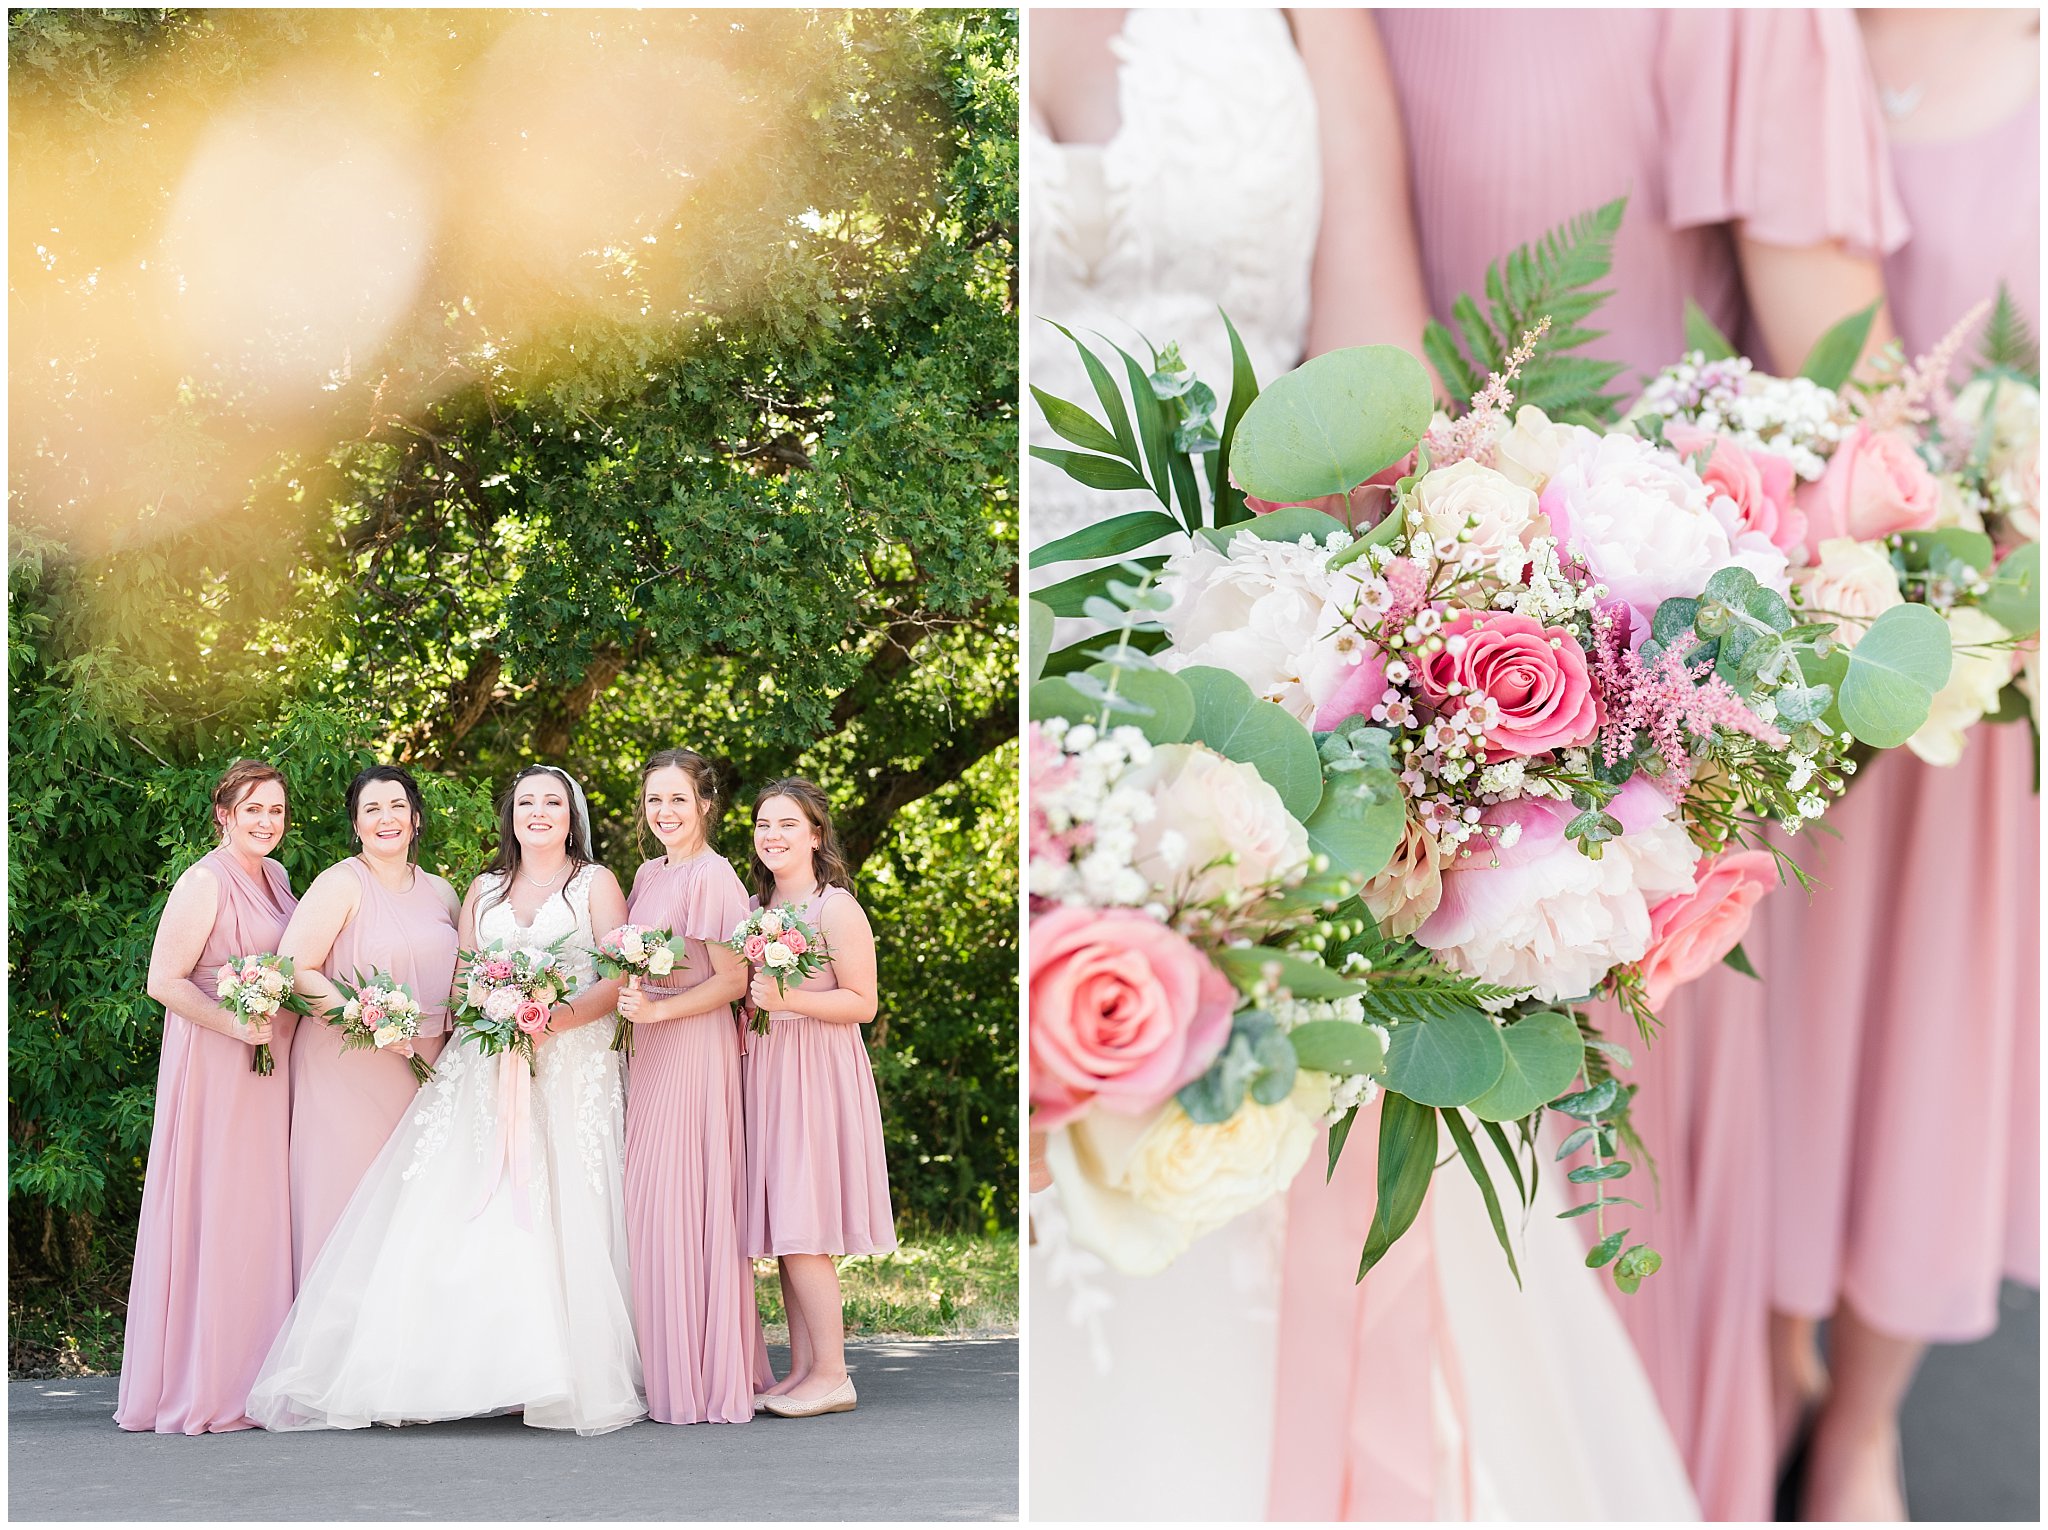 Bride and bridesmaids in blush dusty rose dresses with green white and blush florals | Oak Hills Utah Dusty Rose and Gray Summer Wedding | Jessie and Dallin Photography